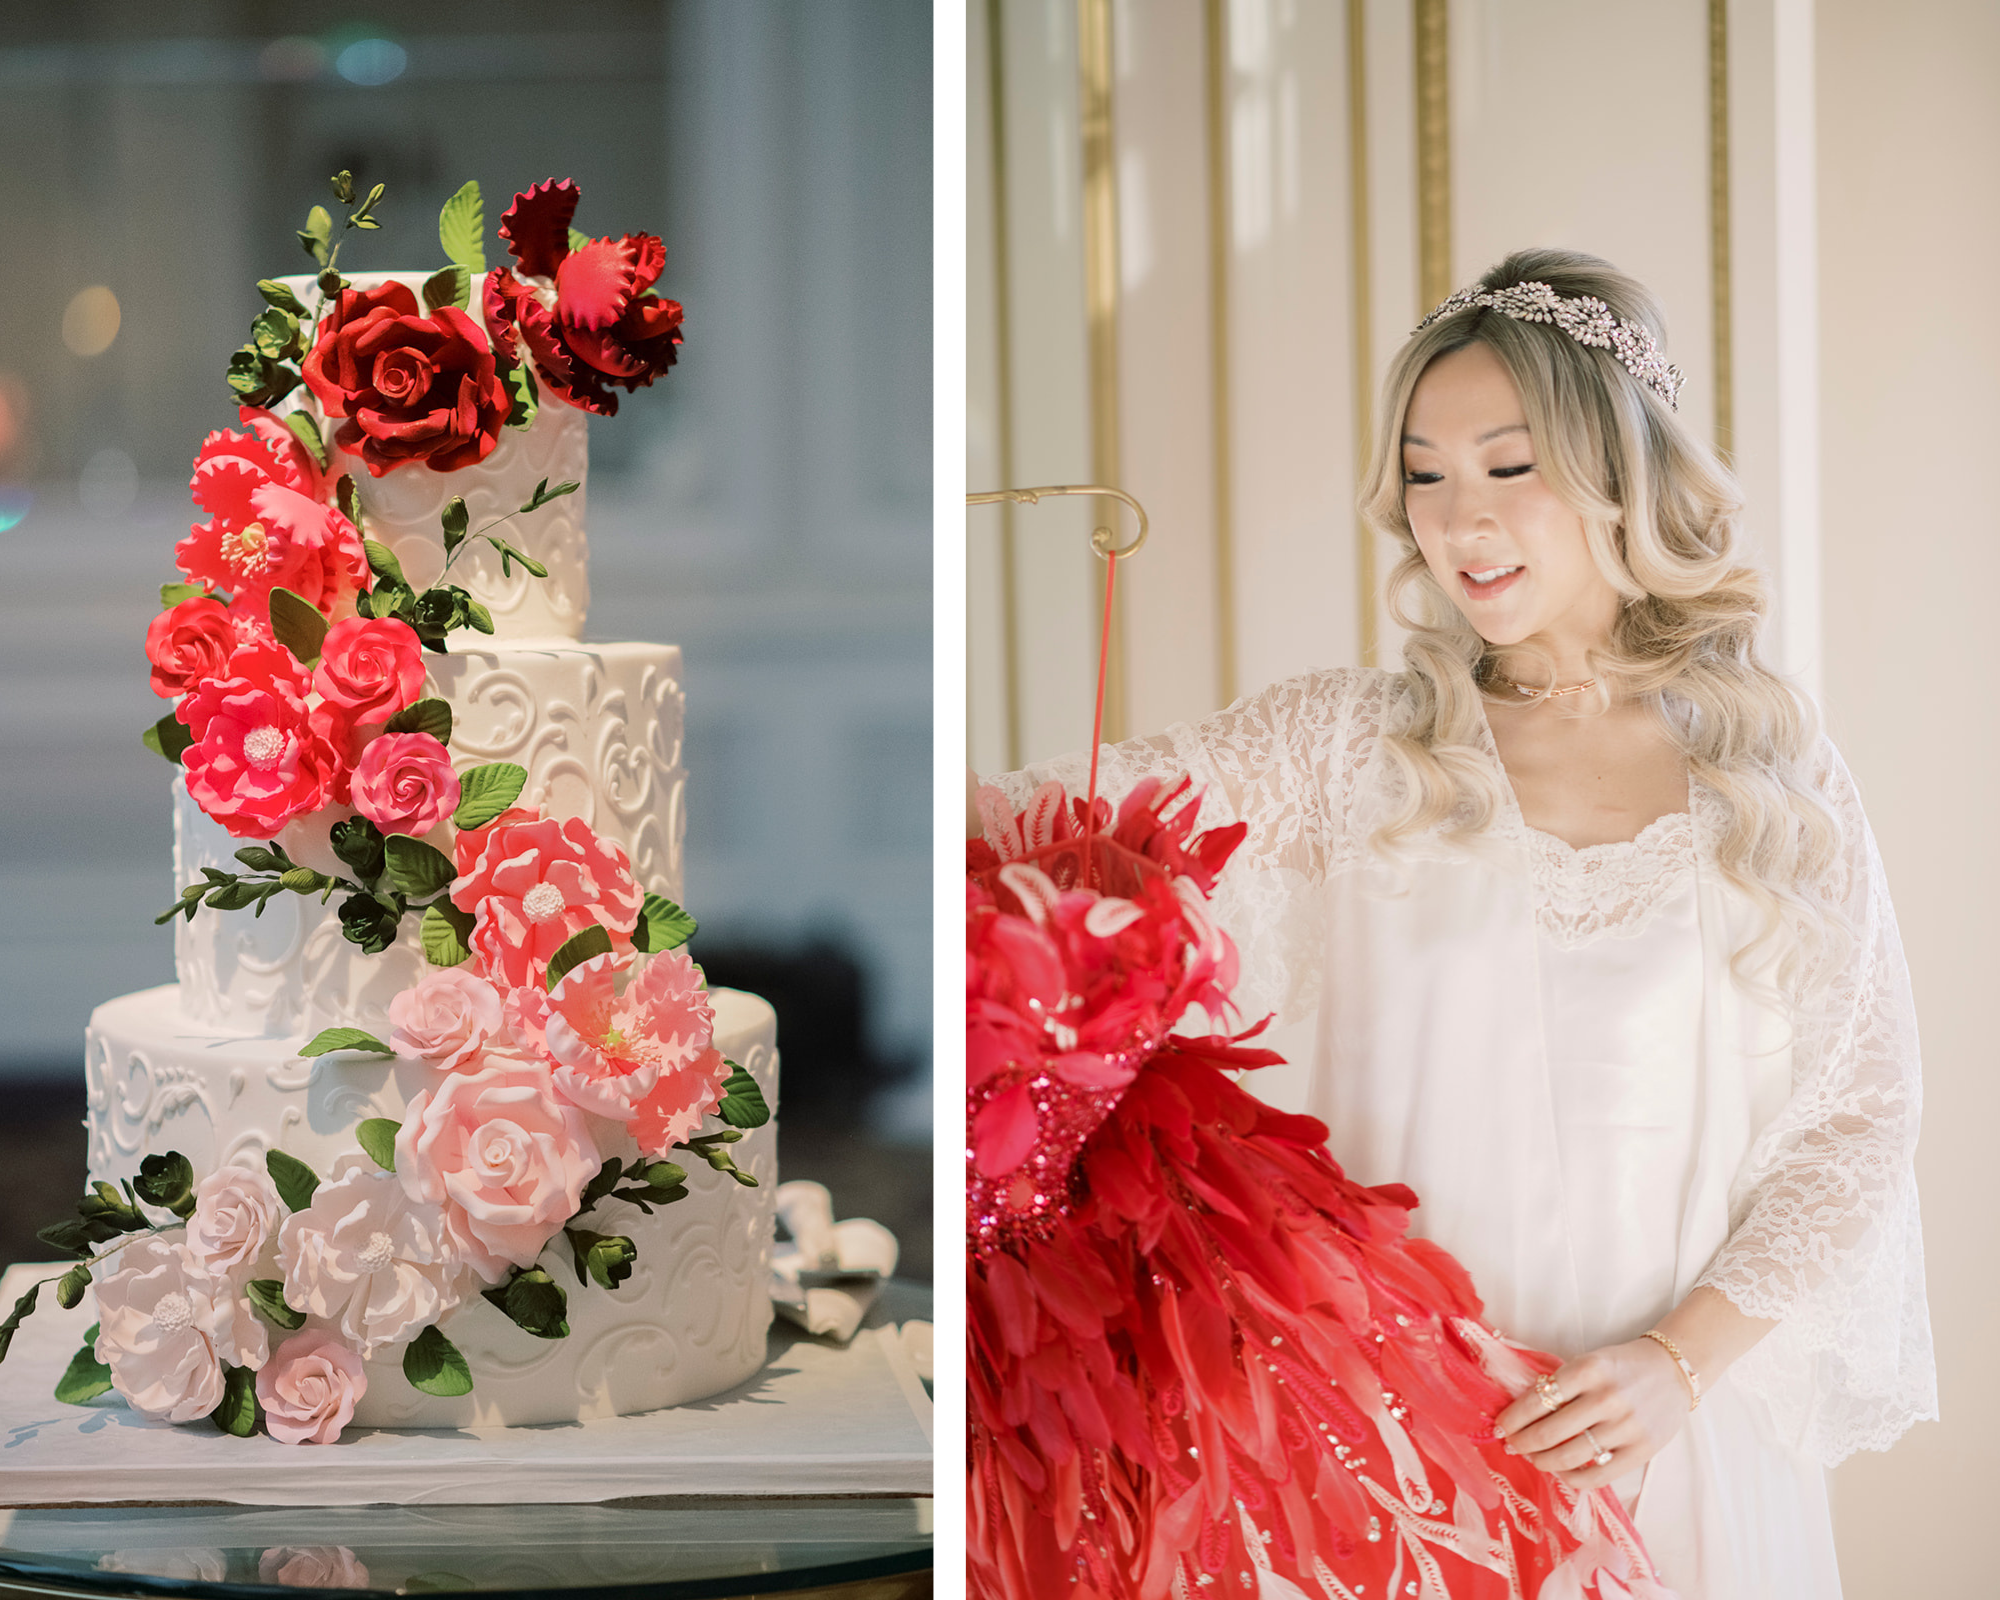 Yvonne’s beautiful white, pink, and red wedding cake, and an image of Yvonne with her pink second wedding dress.